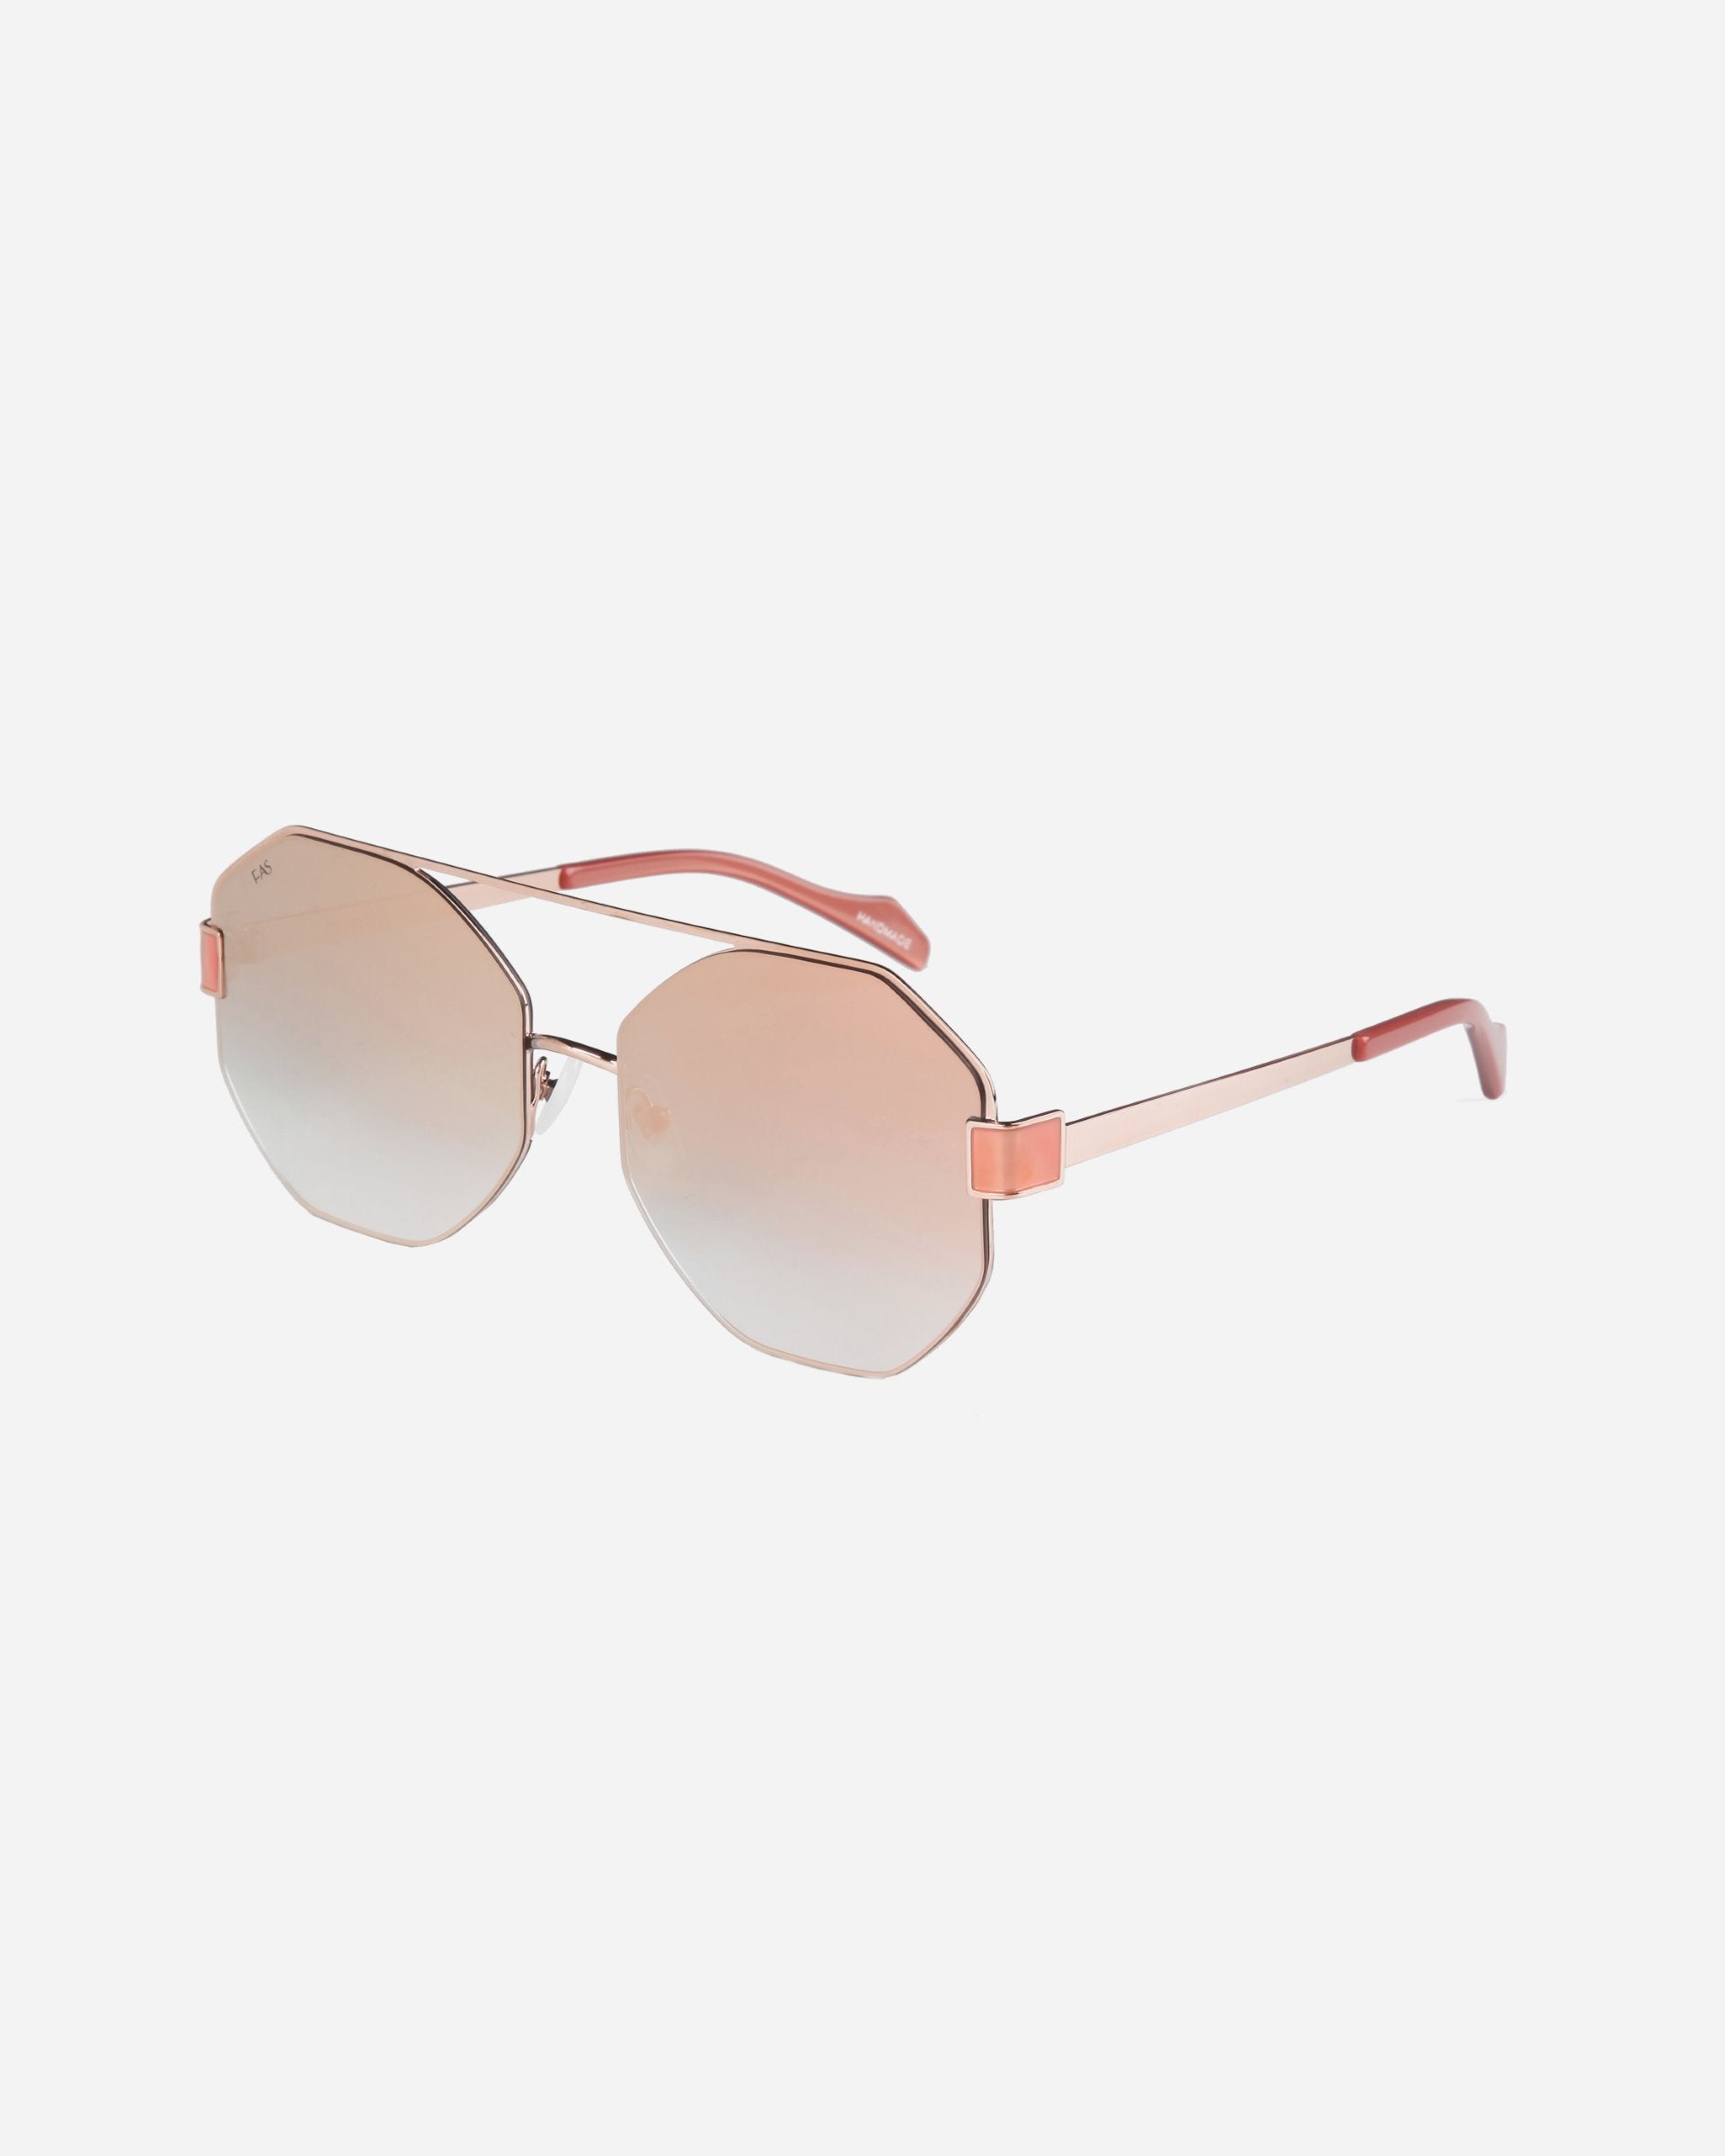 A pair of stylish **For Art&#39;s Sake® Mania** sunglasses with hexagonal stainless steel frames in rose gold, featuring slightly gradient nylon lenses that transition from pink to a lighter hue. The arms are slender with matching rose gold detailing and pink temple tips, plus adjustable nosepads for added comfort.